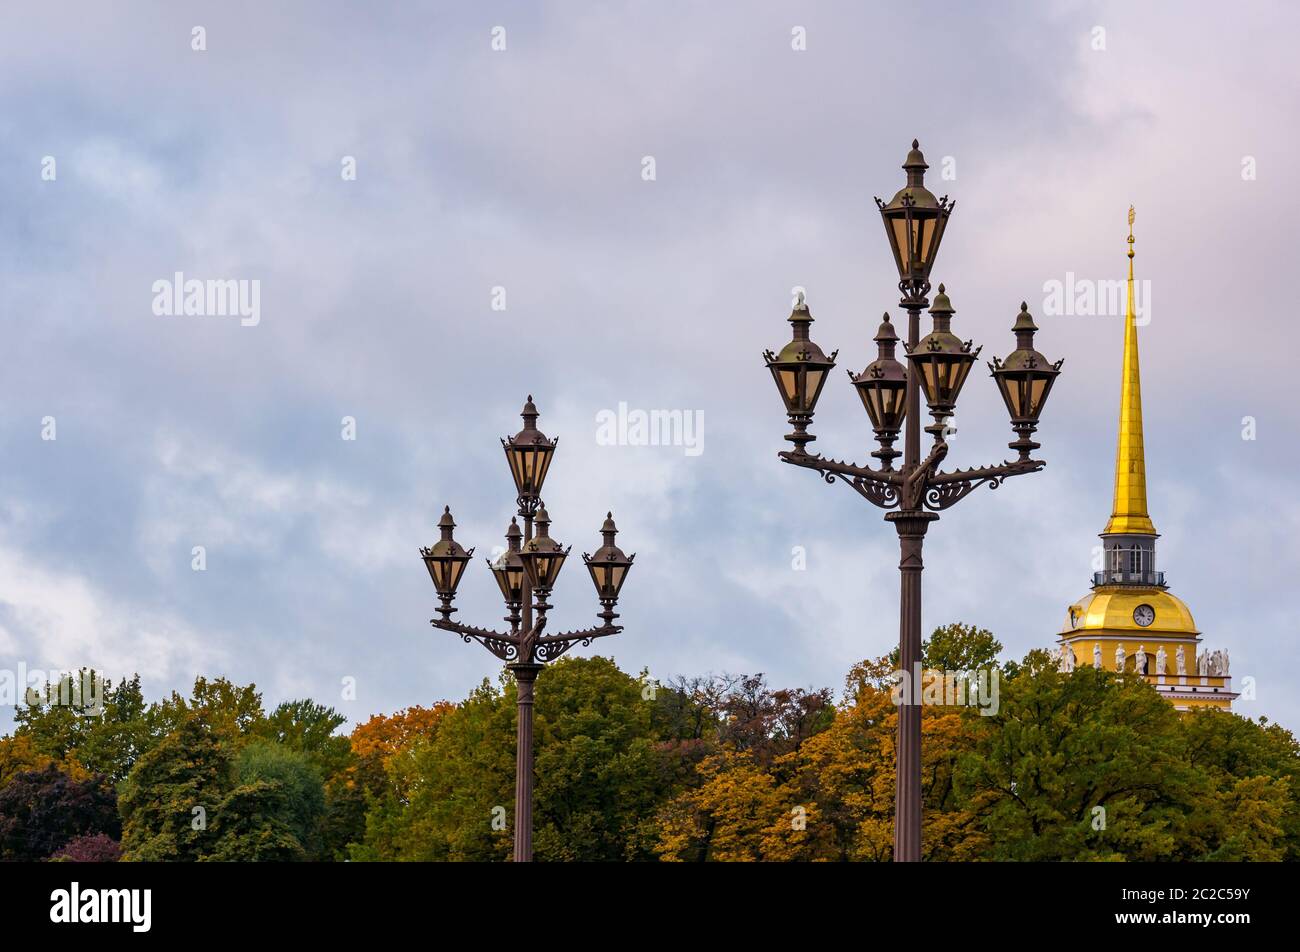 Ornate old fashioned streetlights and spire of Admiralty Building in Autumn, St Petersburg, Russia Stock Photo